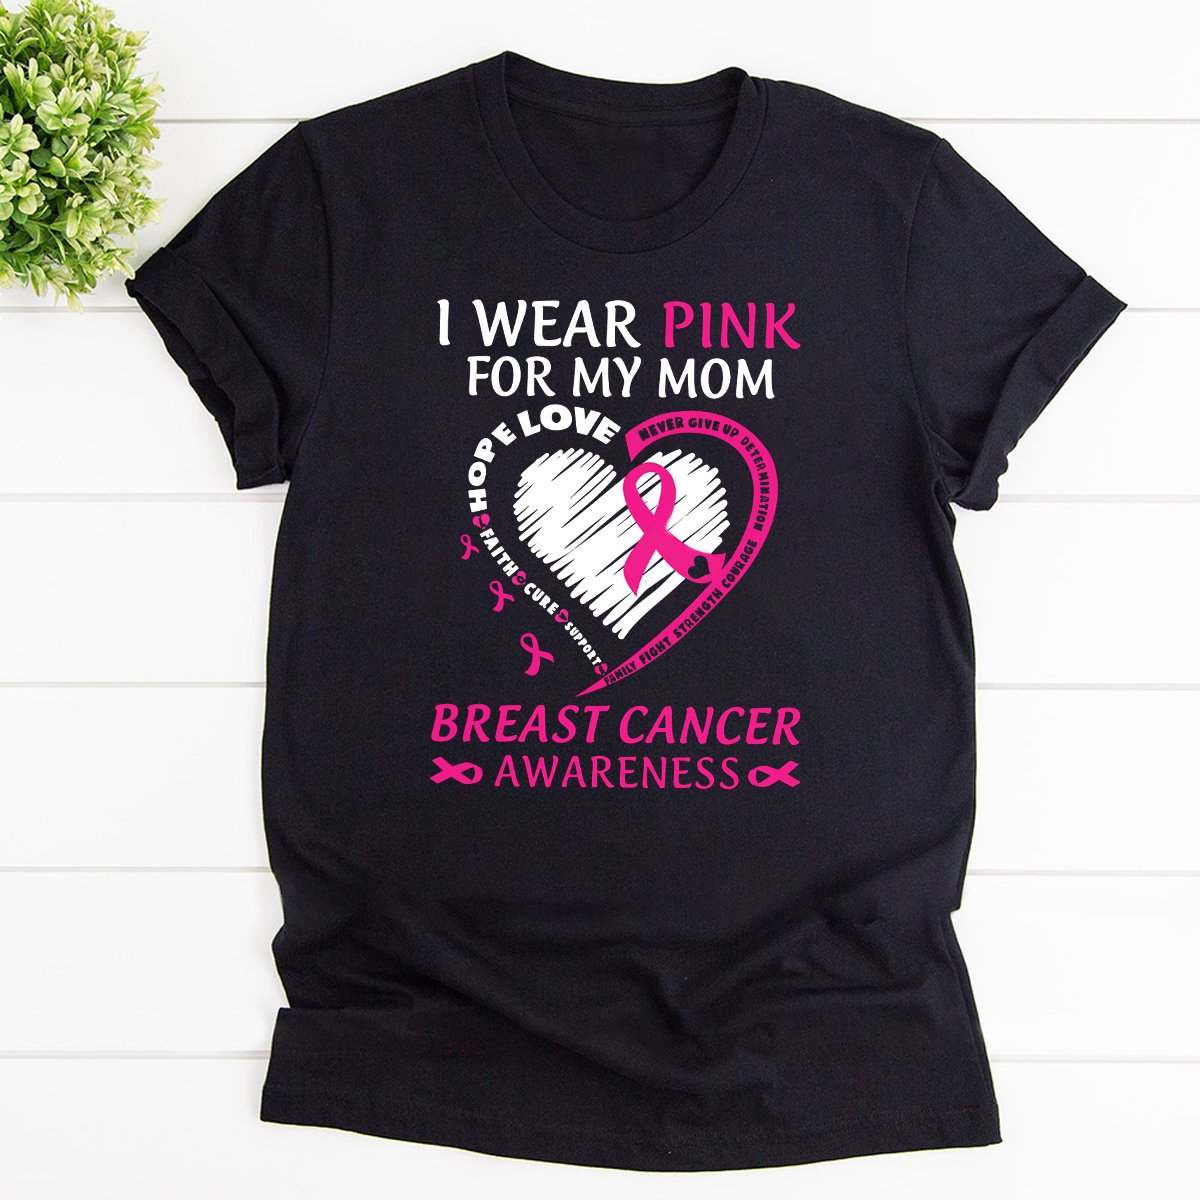 Breast Shirt Fighting Breast Shirt I Wear Pink For My Mom Shirt Breast Cancer Awareness Cotton Shirt, Hoodies For Men And Women Mothers Day Gift Happy Mothers Day